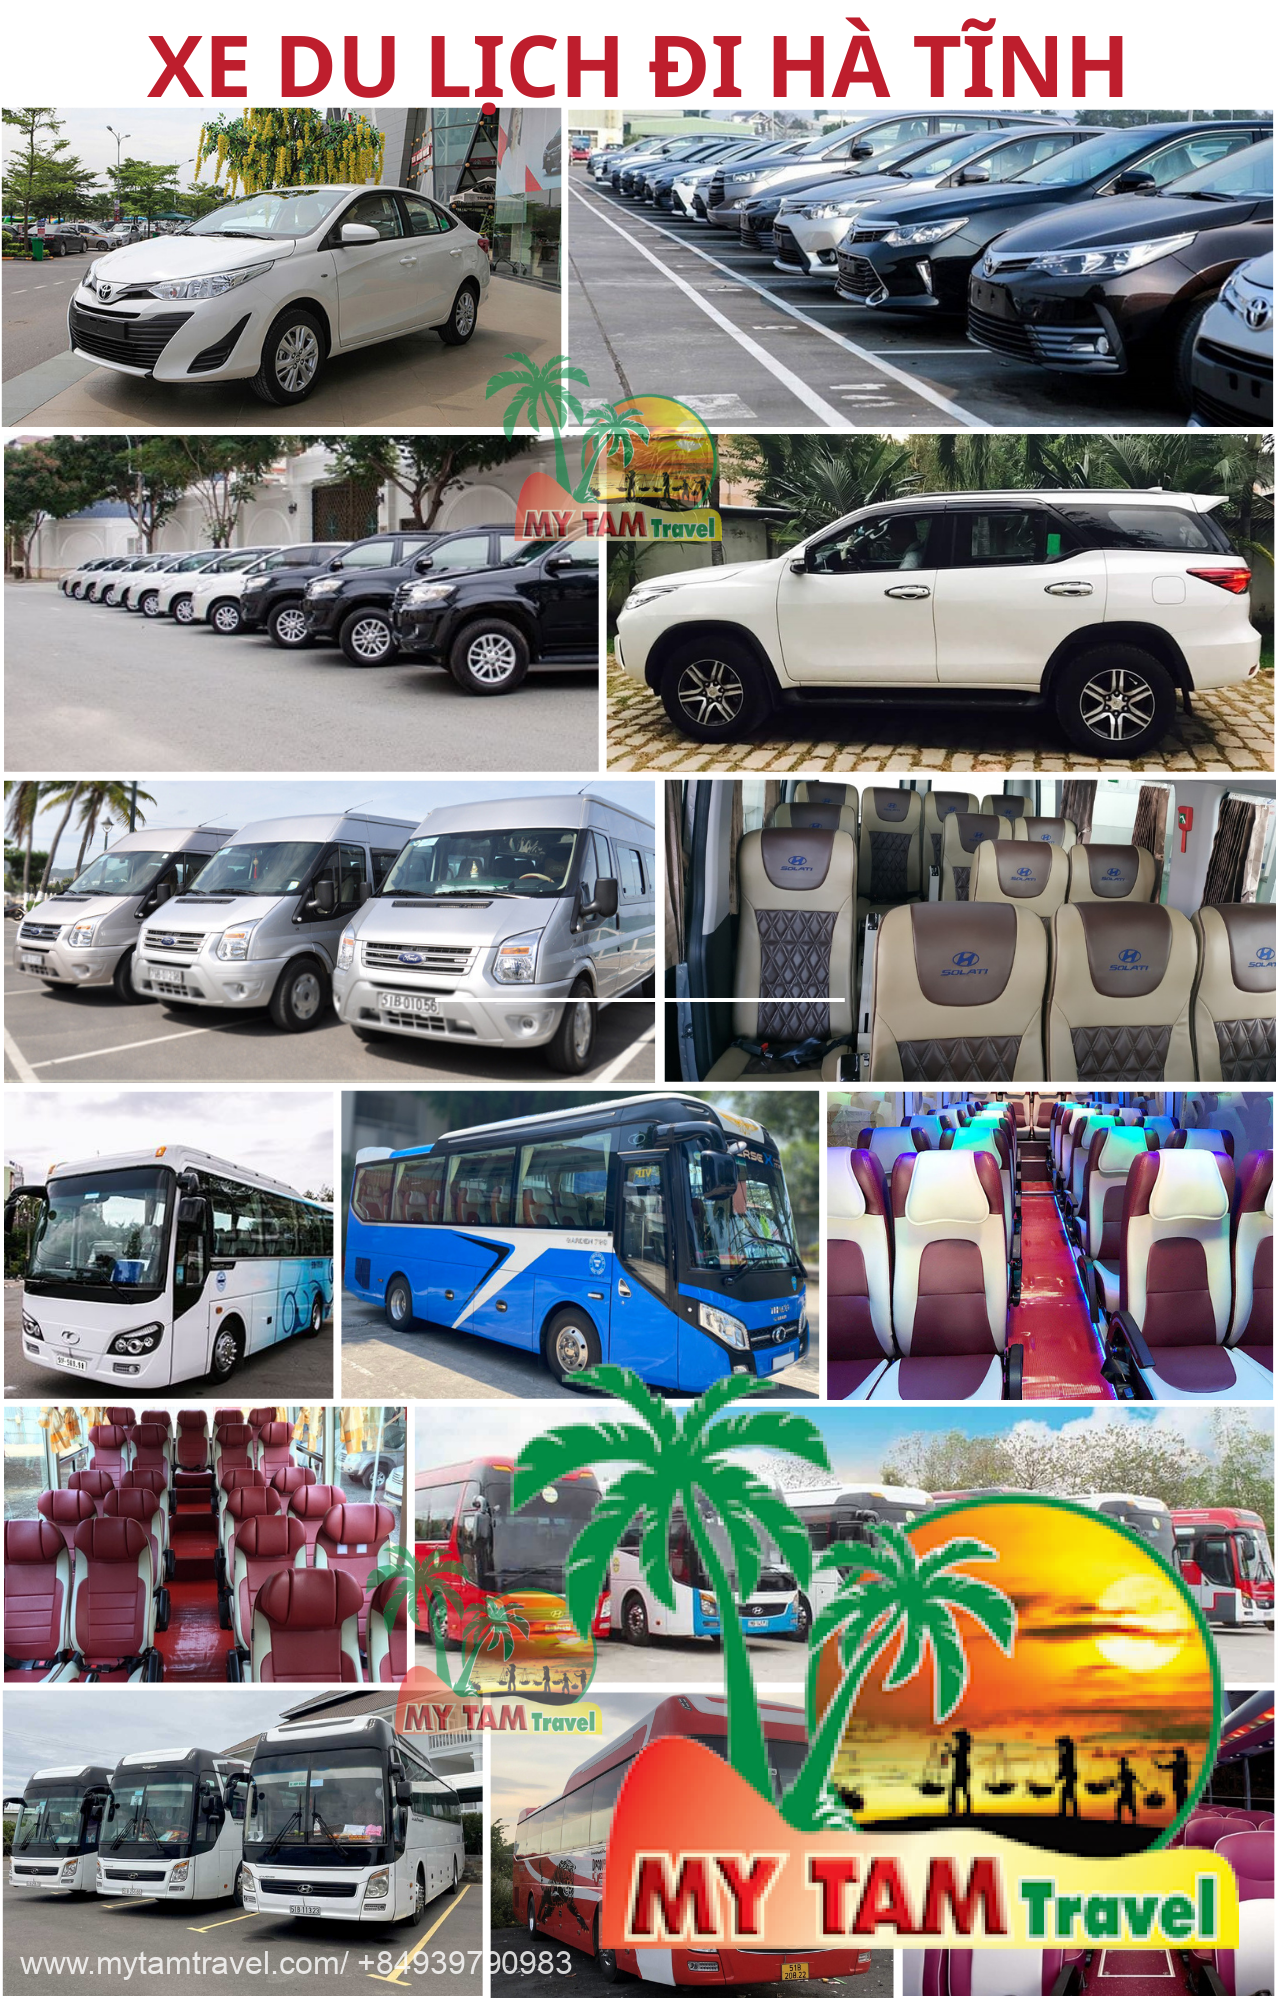 Car rental in huong son district